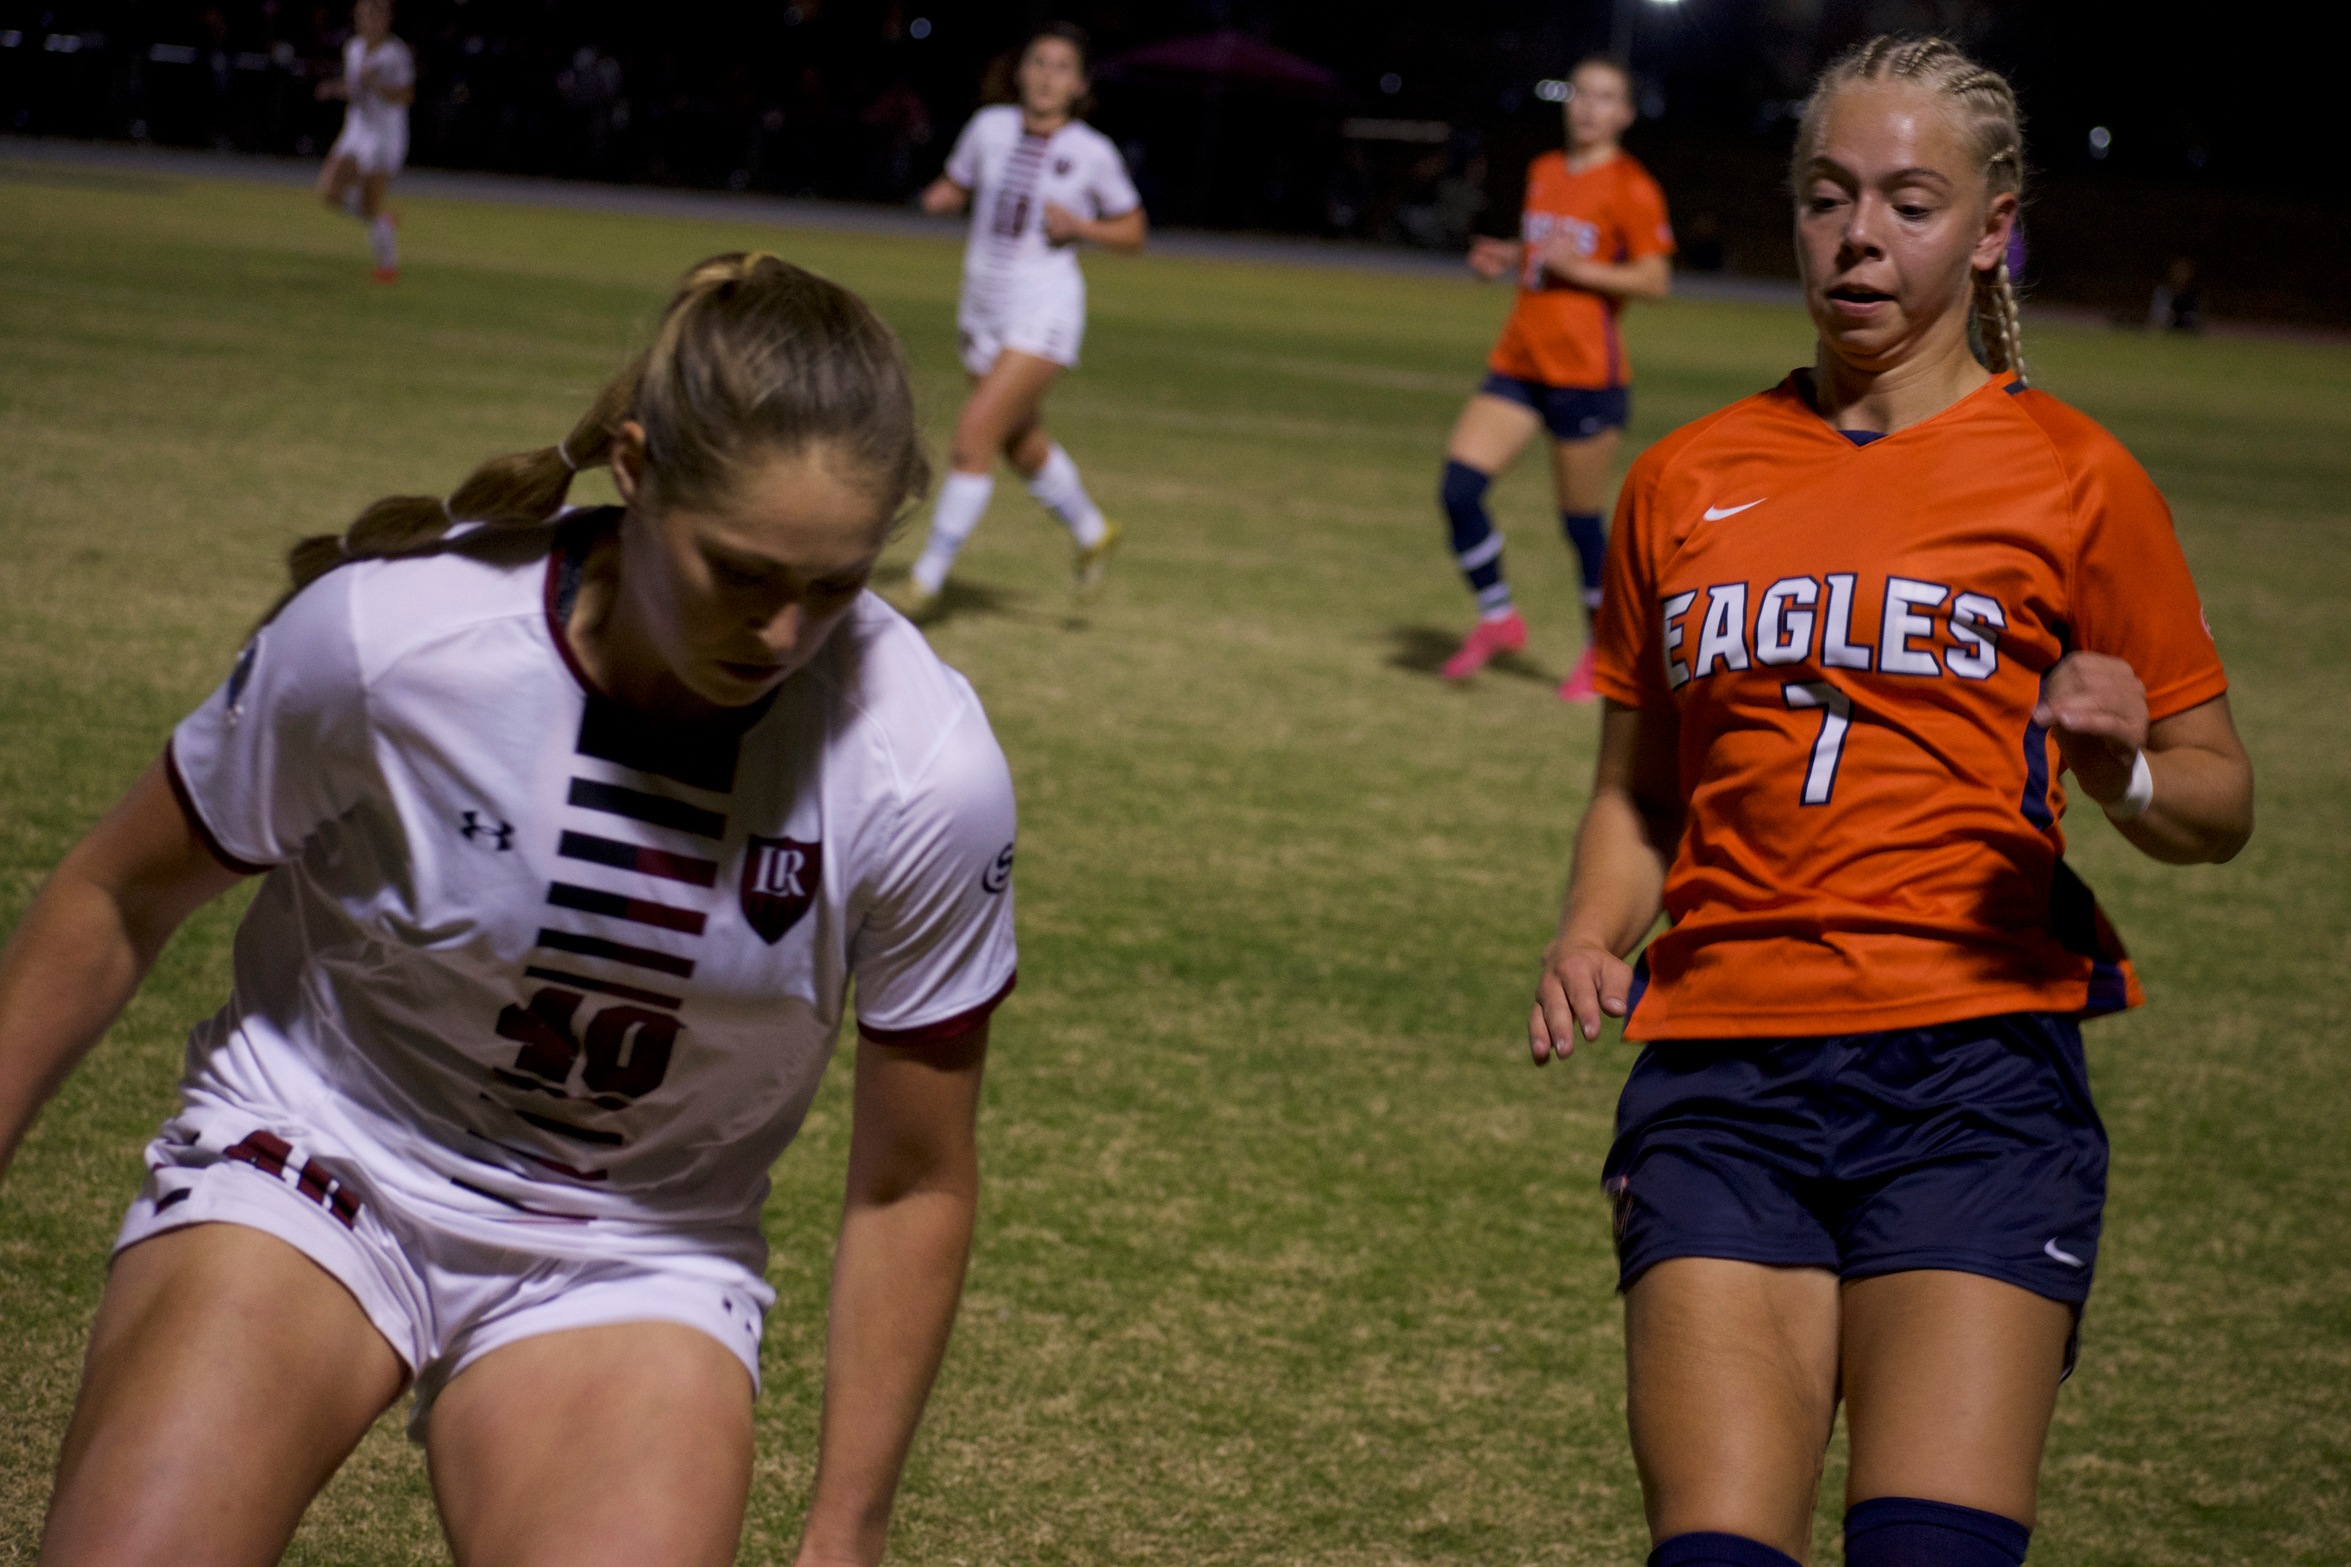 Eagles Fall in First-Round of NCAA Tournament Despite Strong Fight Against Top-Seeded Bears